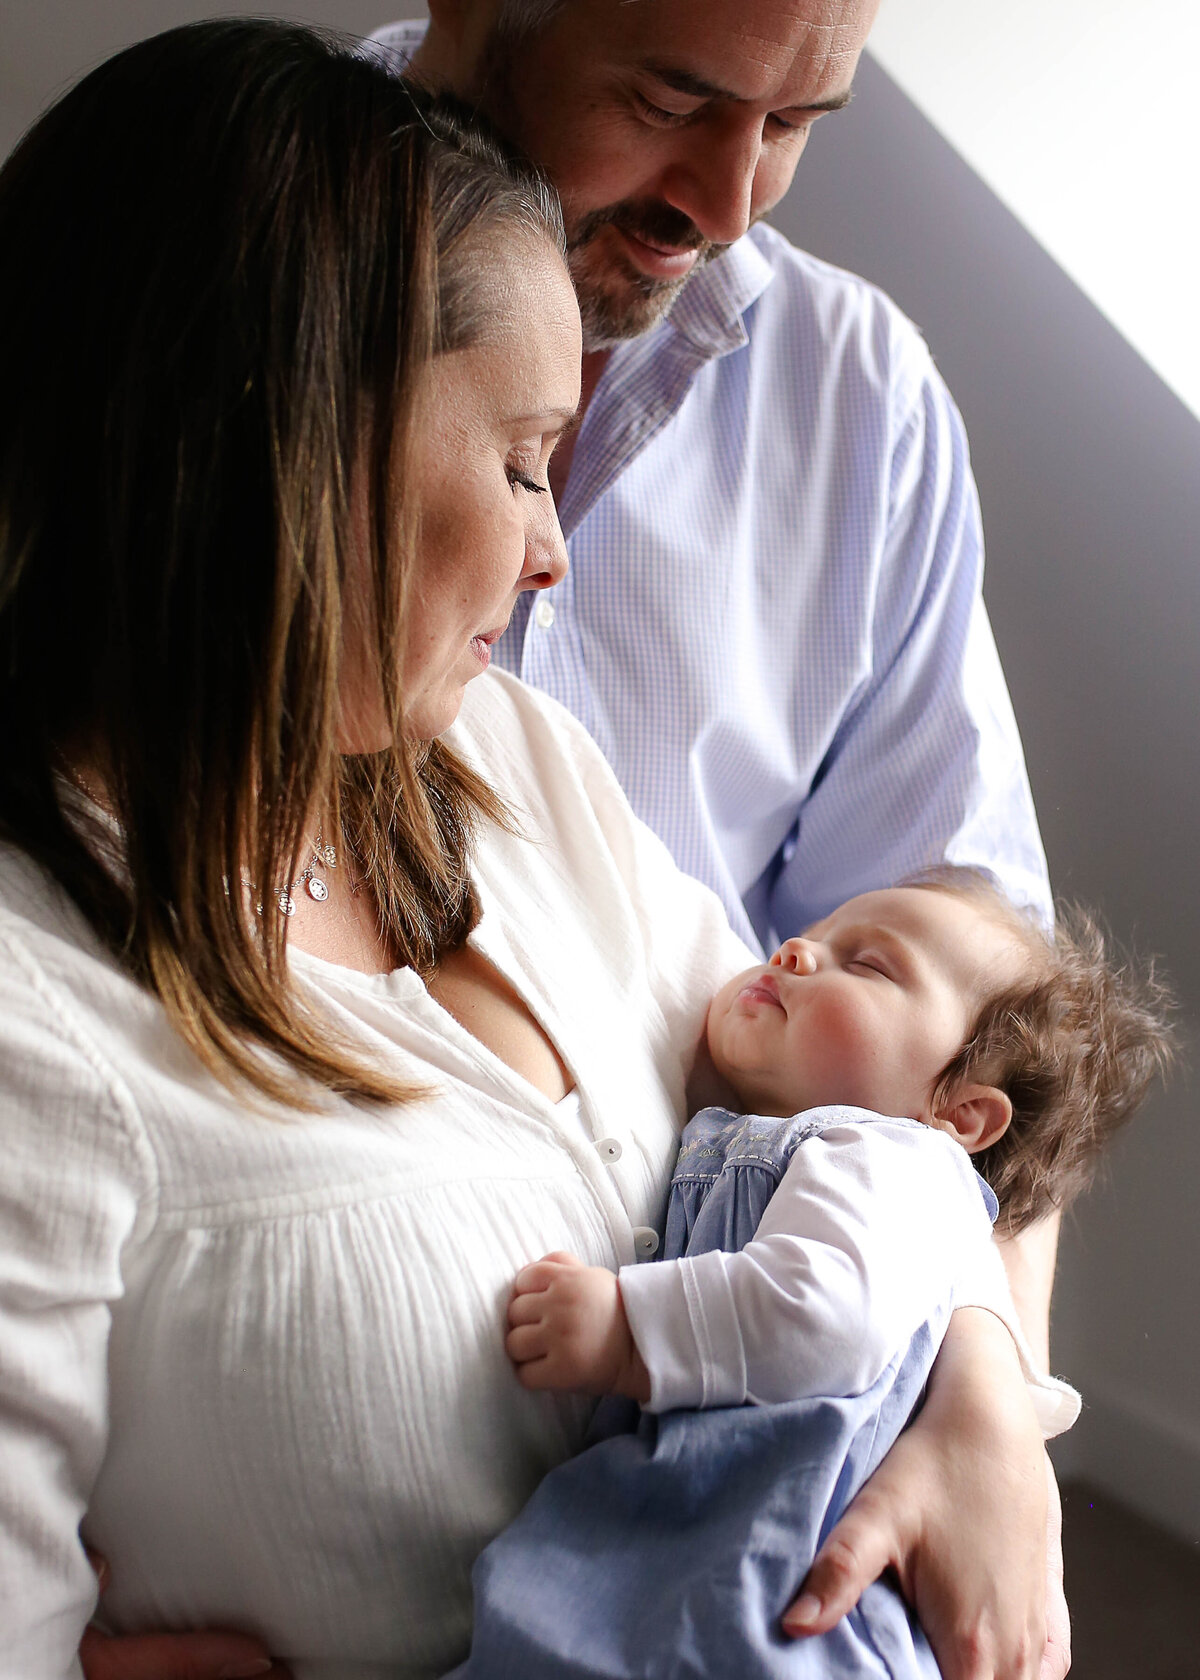 Vanessa is an experienced local photographer specialising in babies and newborns.